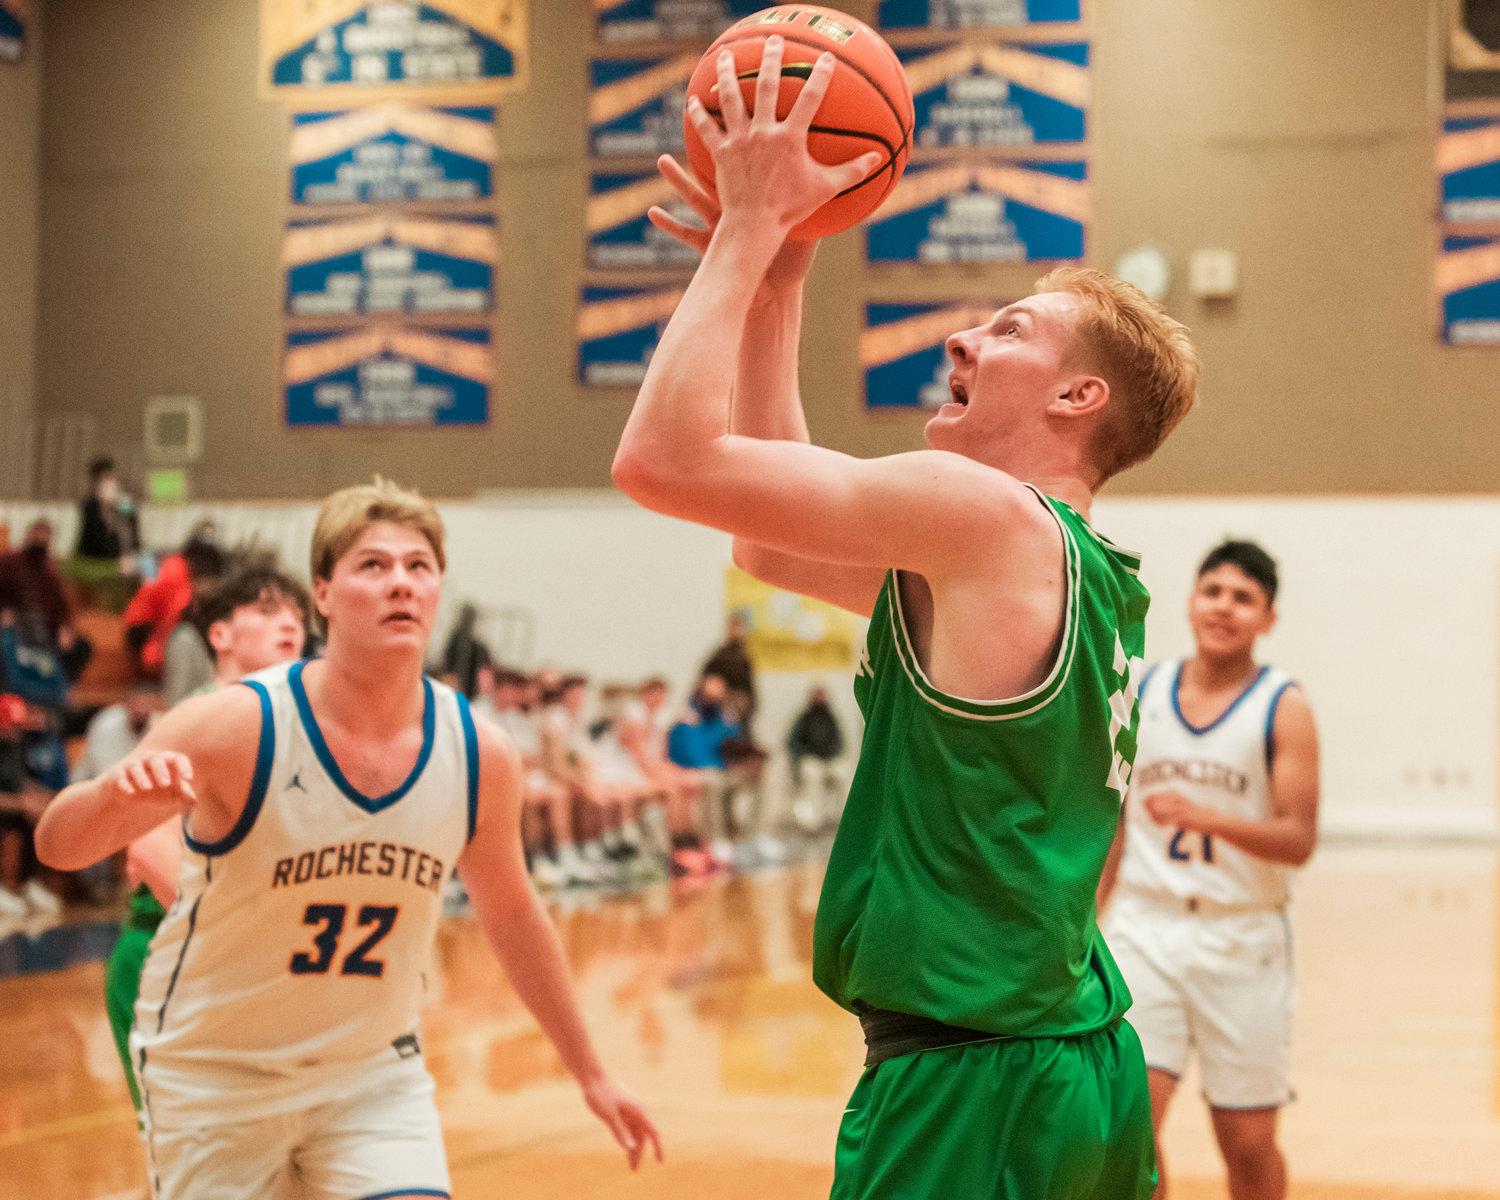 Tumwater’s Tanner Brewer (23) looks to shoot Wednesday night during a game in Rochester.